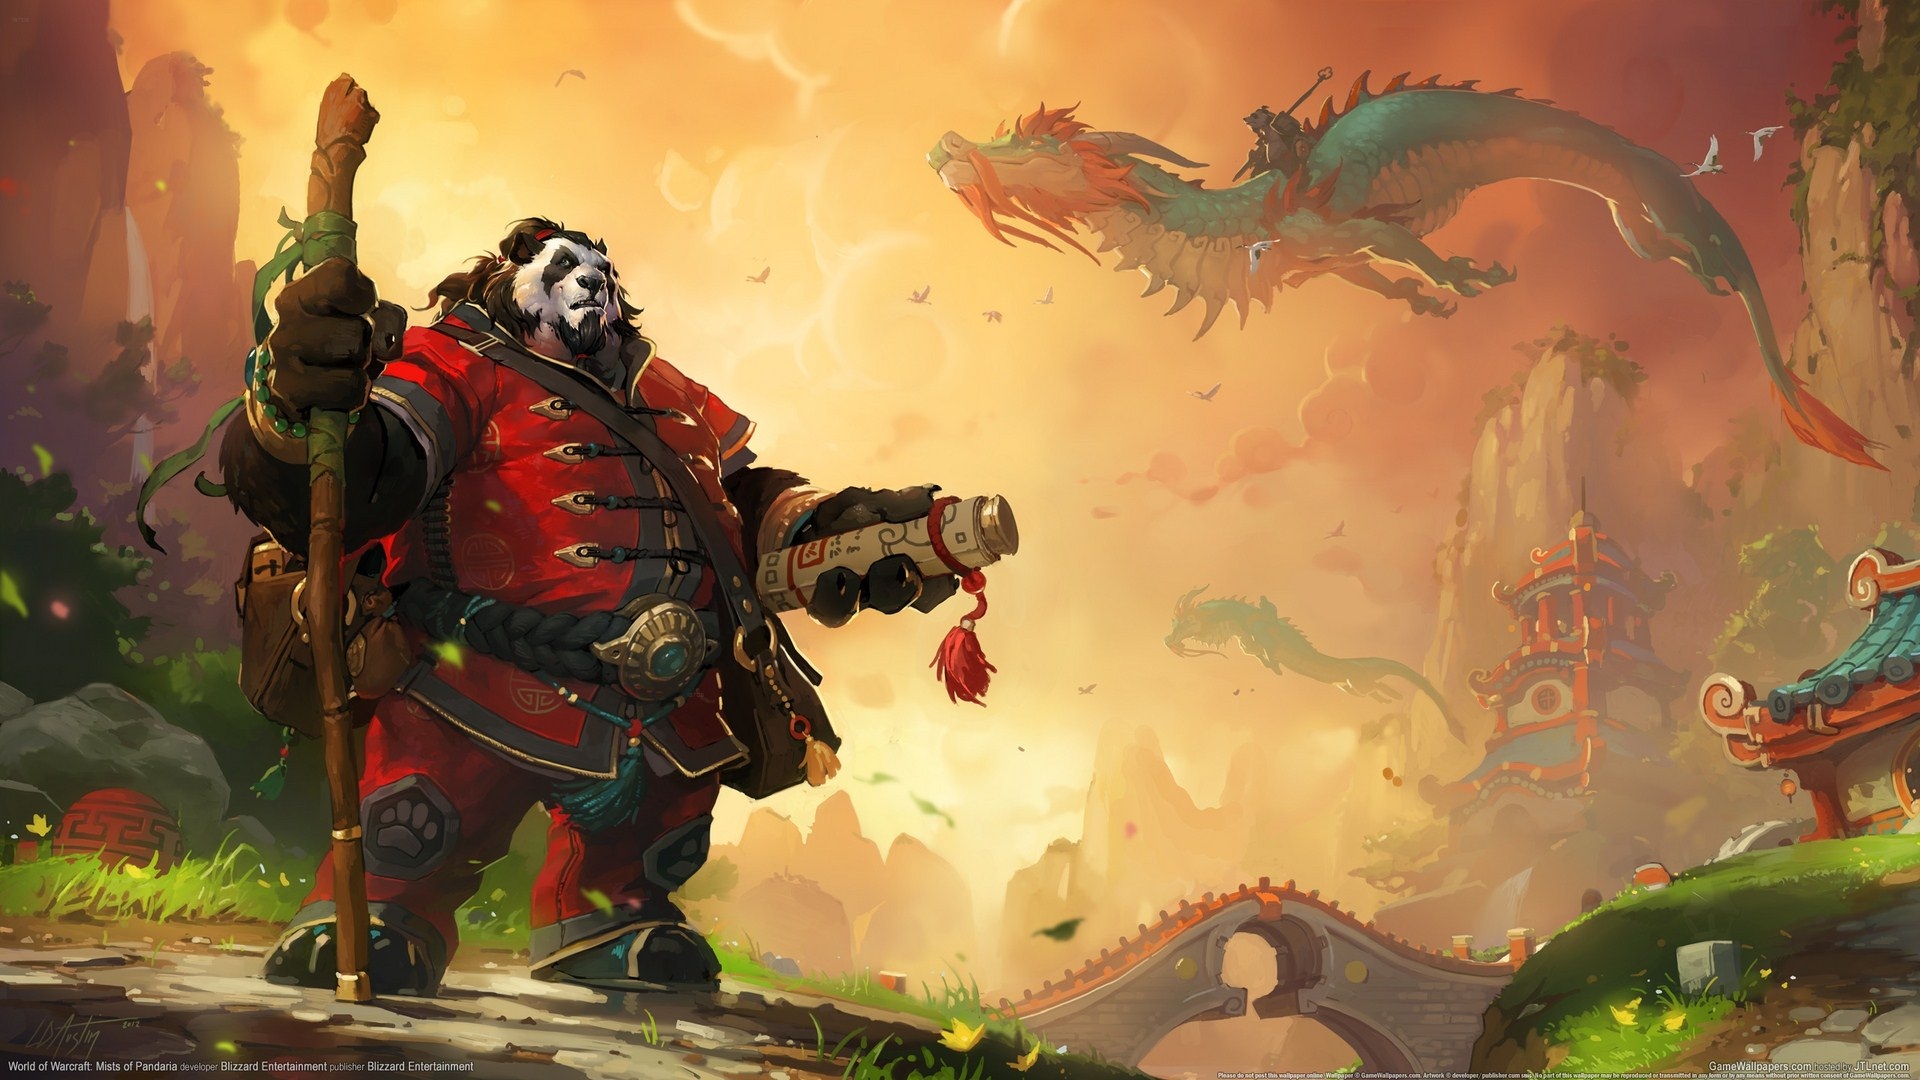 World of Warcraft: Mists of Pandaria HD wallpapers #12 - 1920x1080